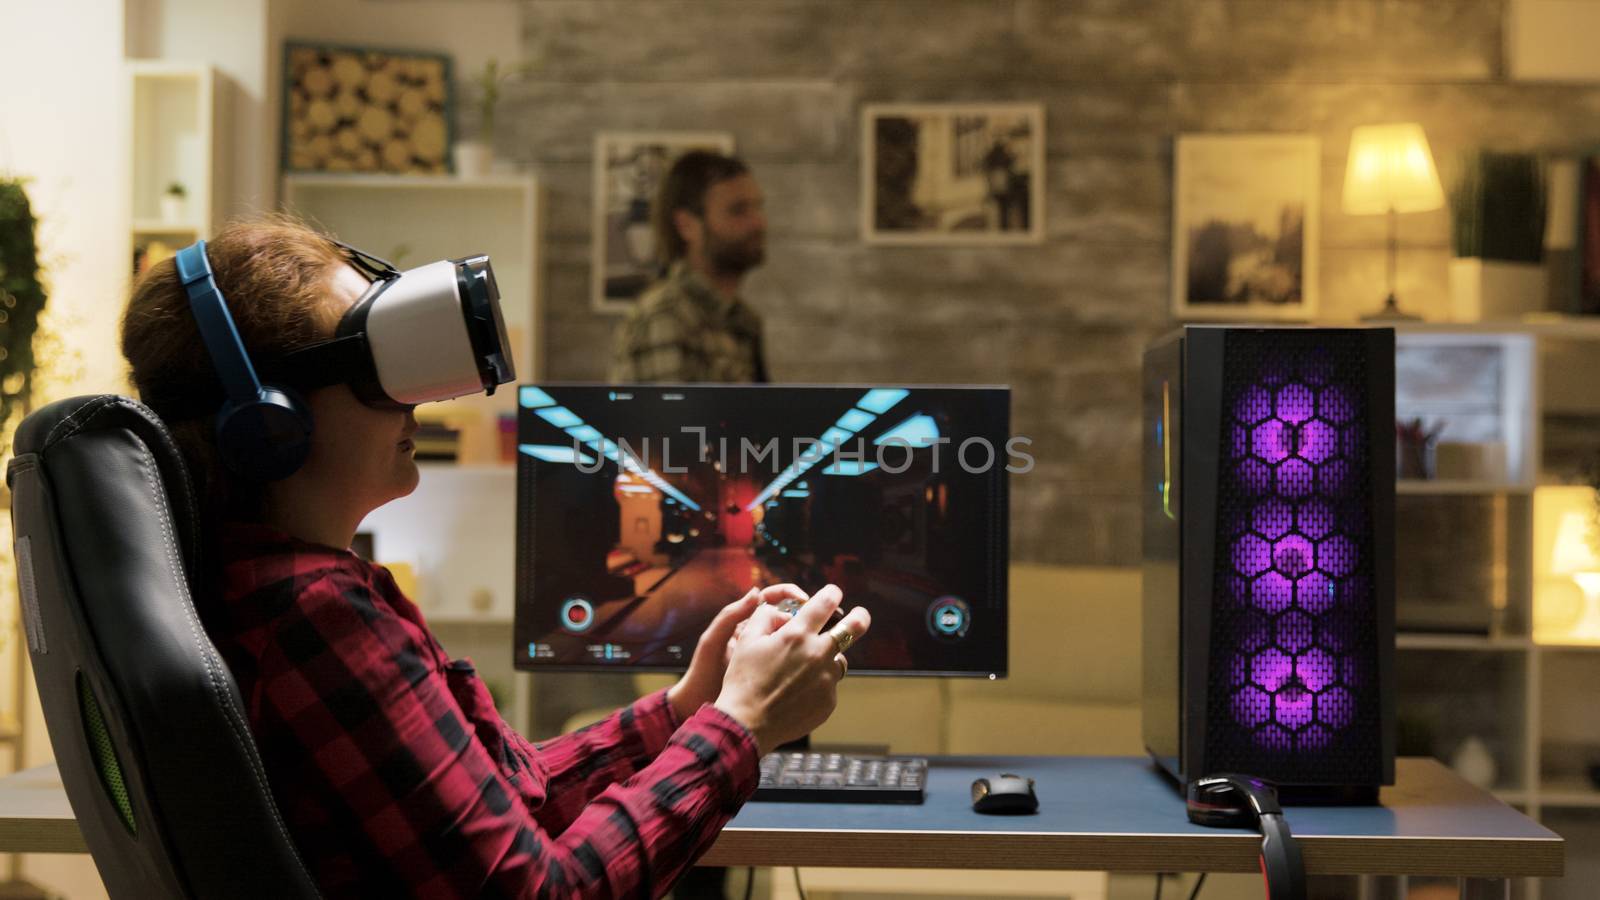 Woman relaxing playing video games using vr headset. Game over for female gamer. Man in the background.